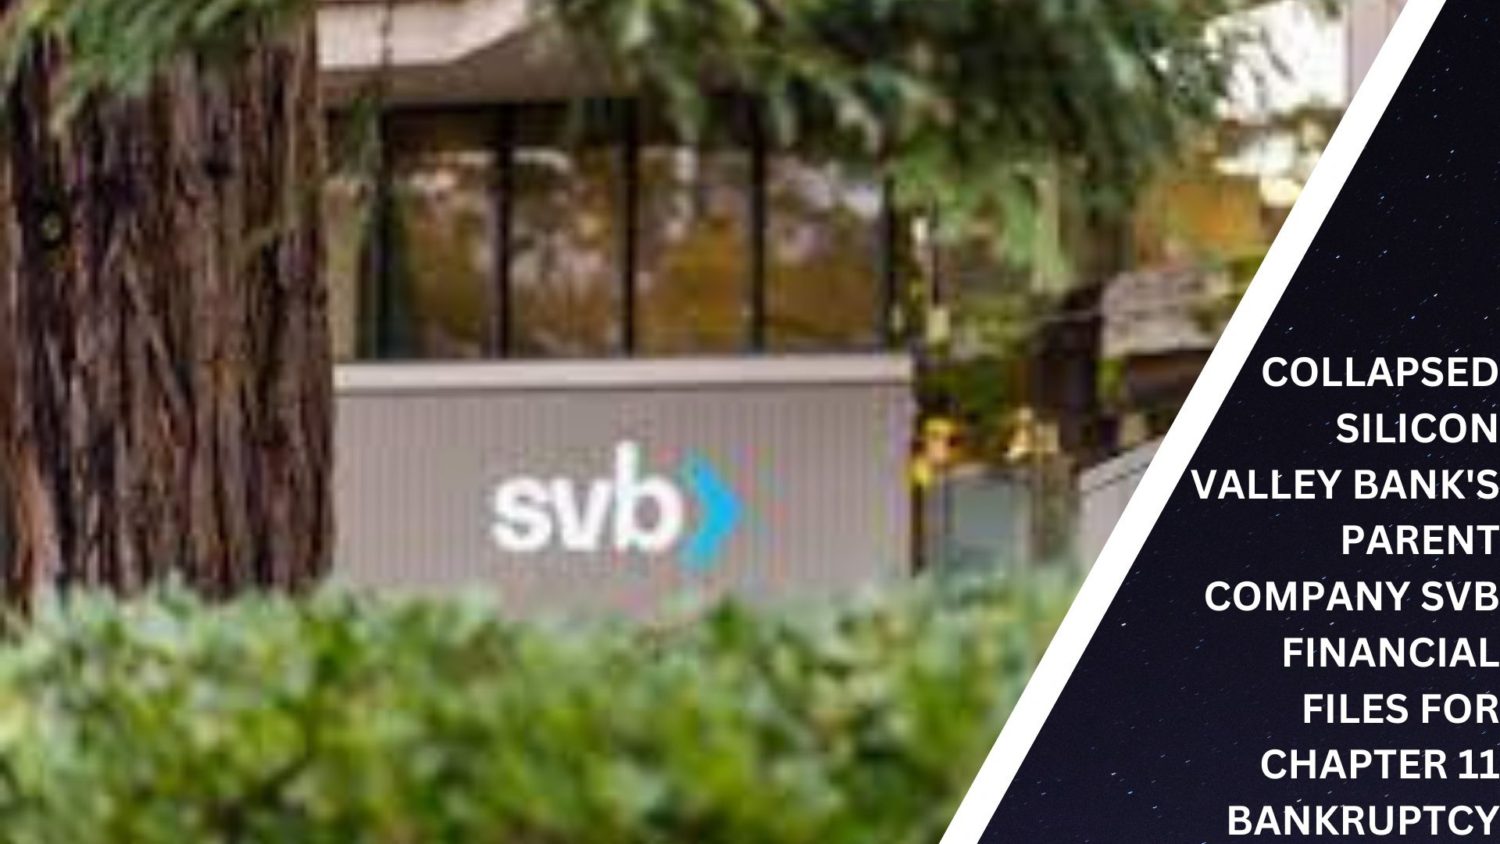 Collapsed Silicon Valley Bank'S Parent Company Svb Financial Files For Chapter 11 Bankruptcy